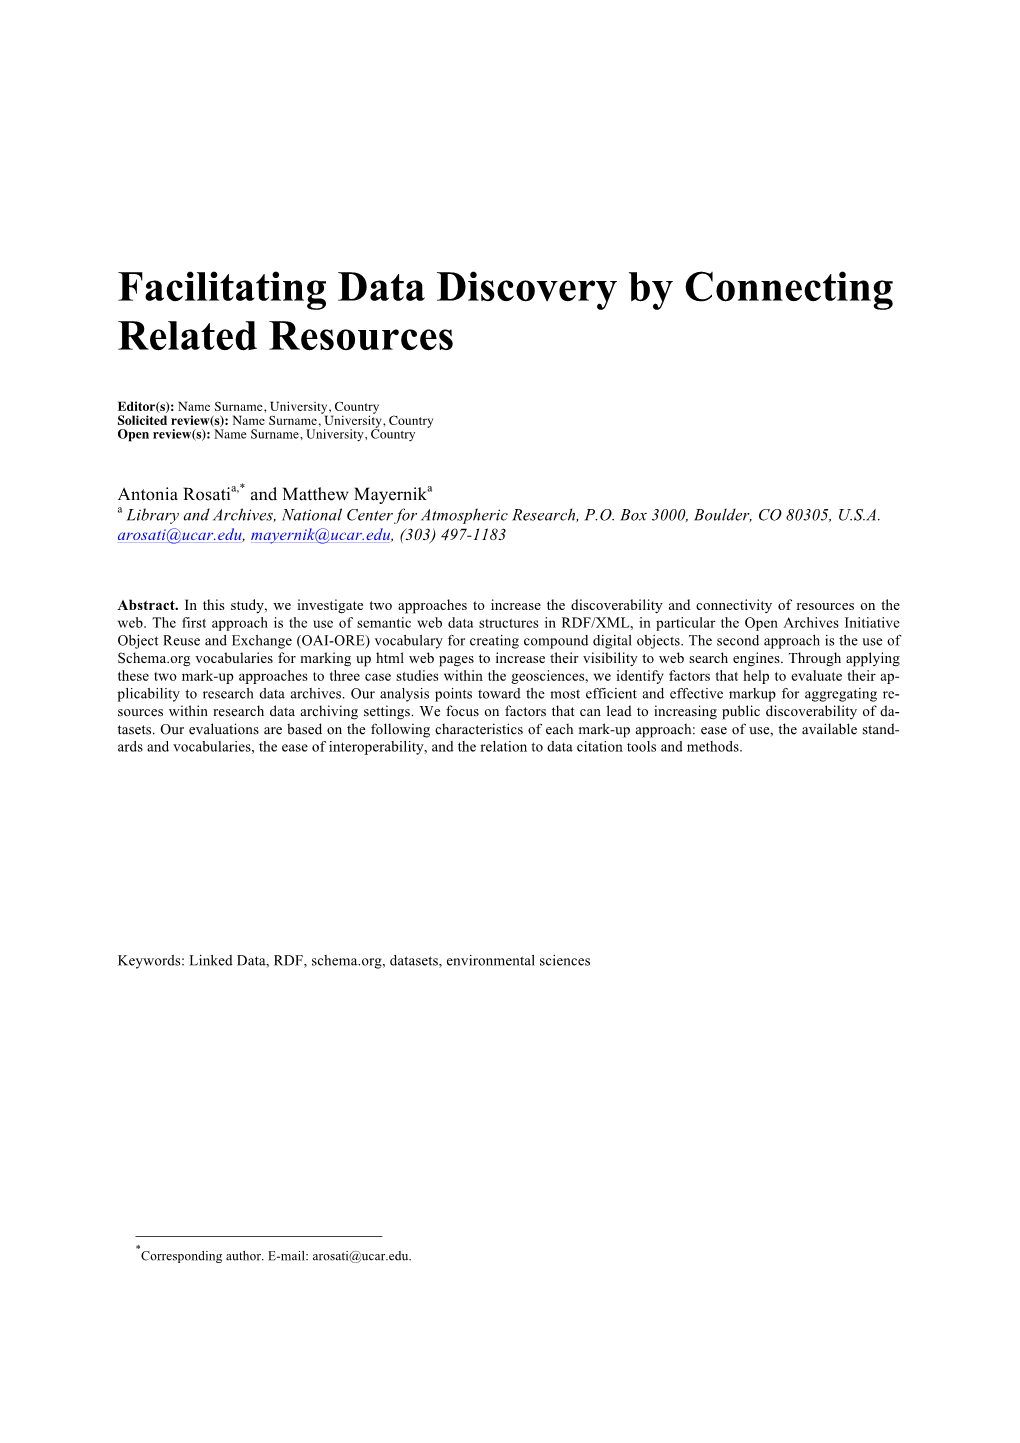 Facilitating Data Discovery by Connecting Related Resources